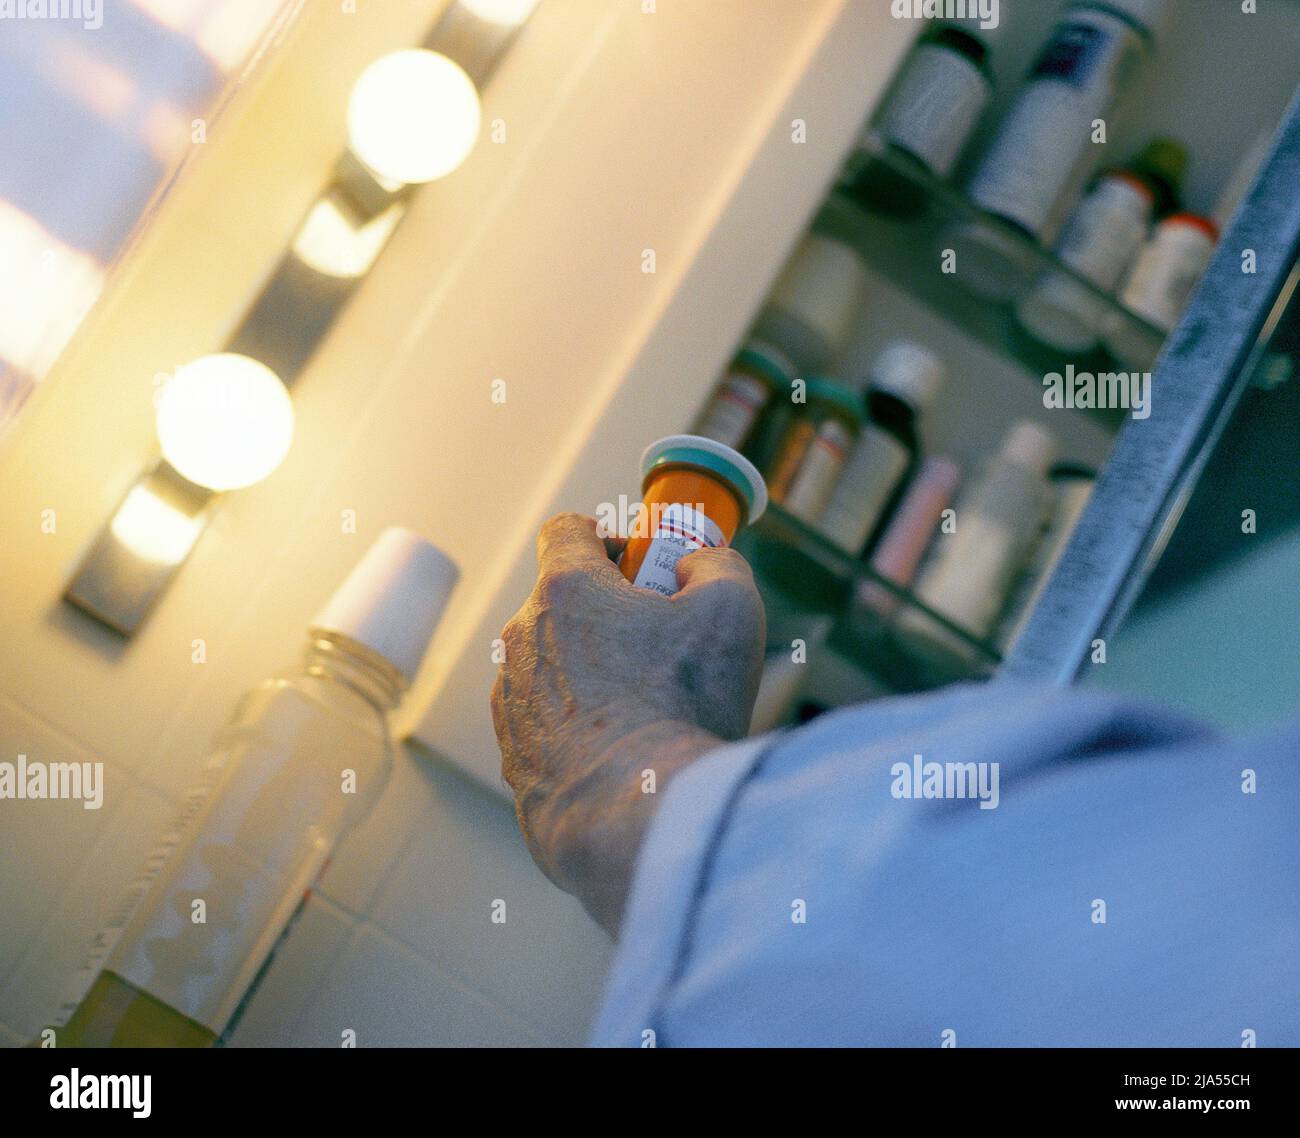 Man taking medication from open medicine cabinet in the bathroom. Senior reading label on pill bottle before medicating. Cautious. Stock Photo